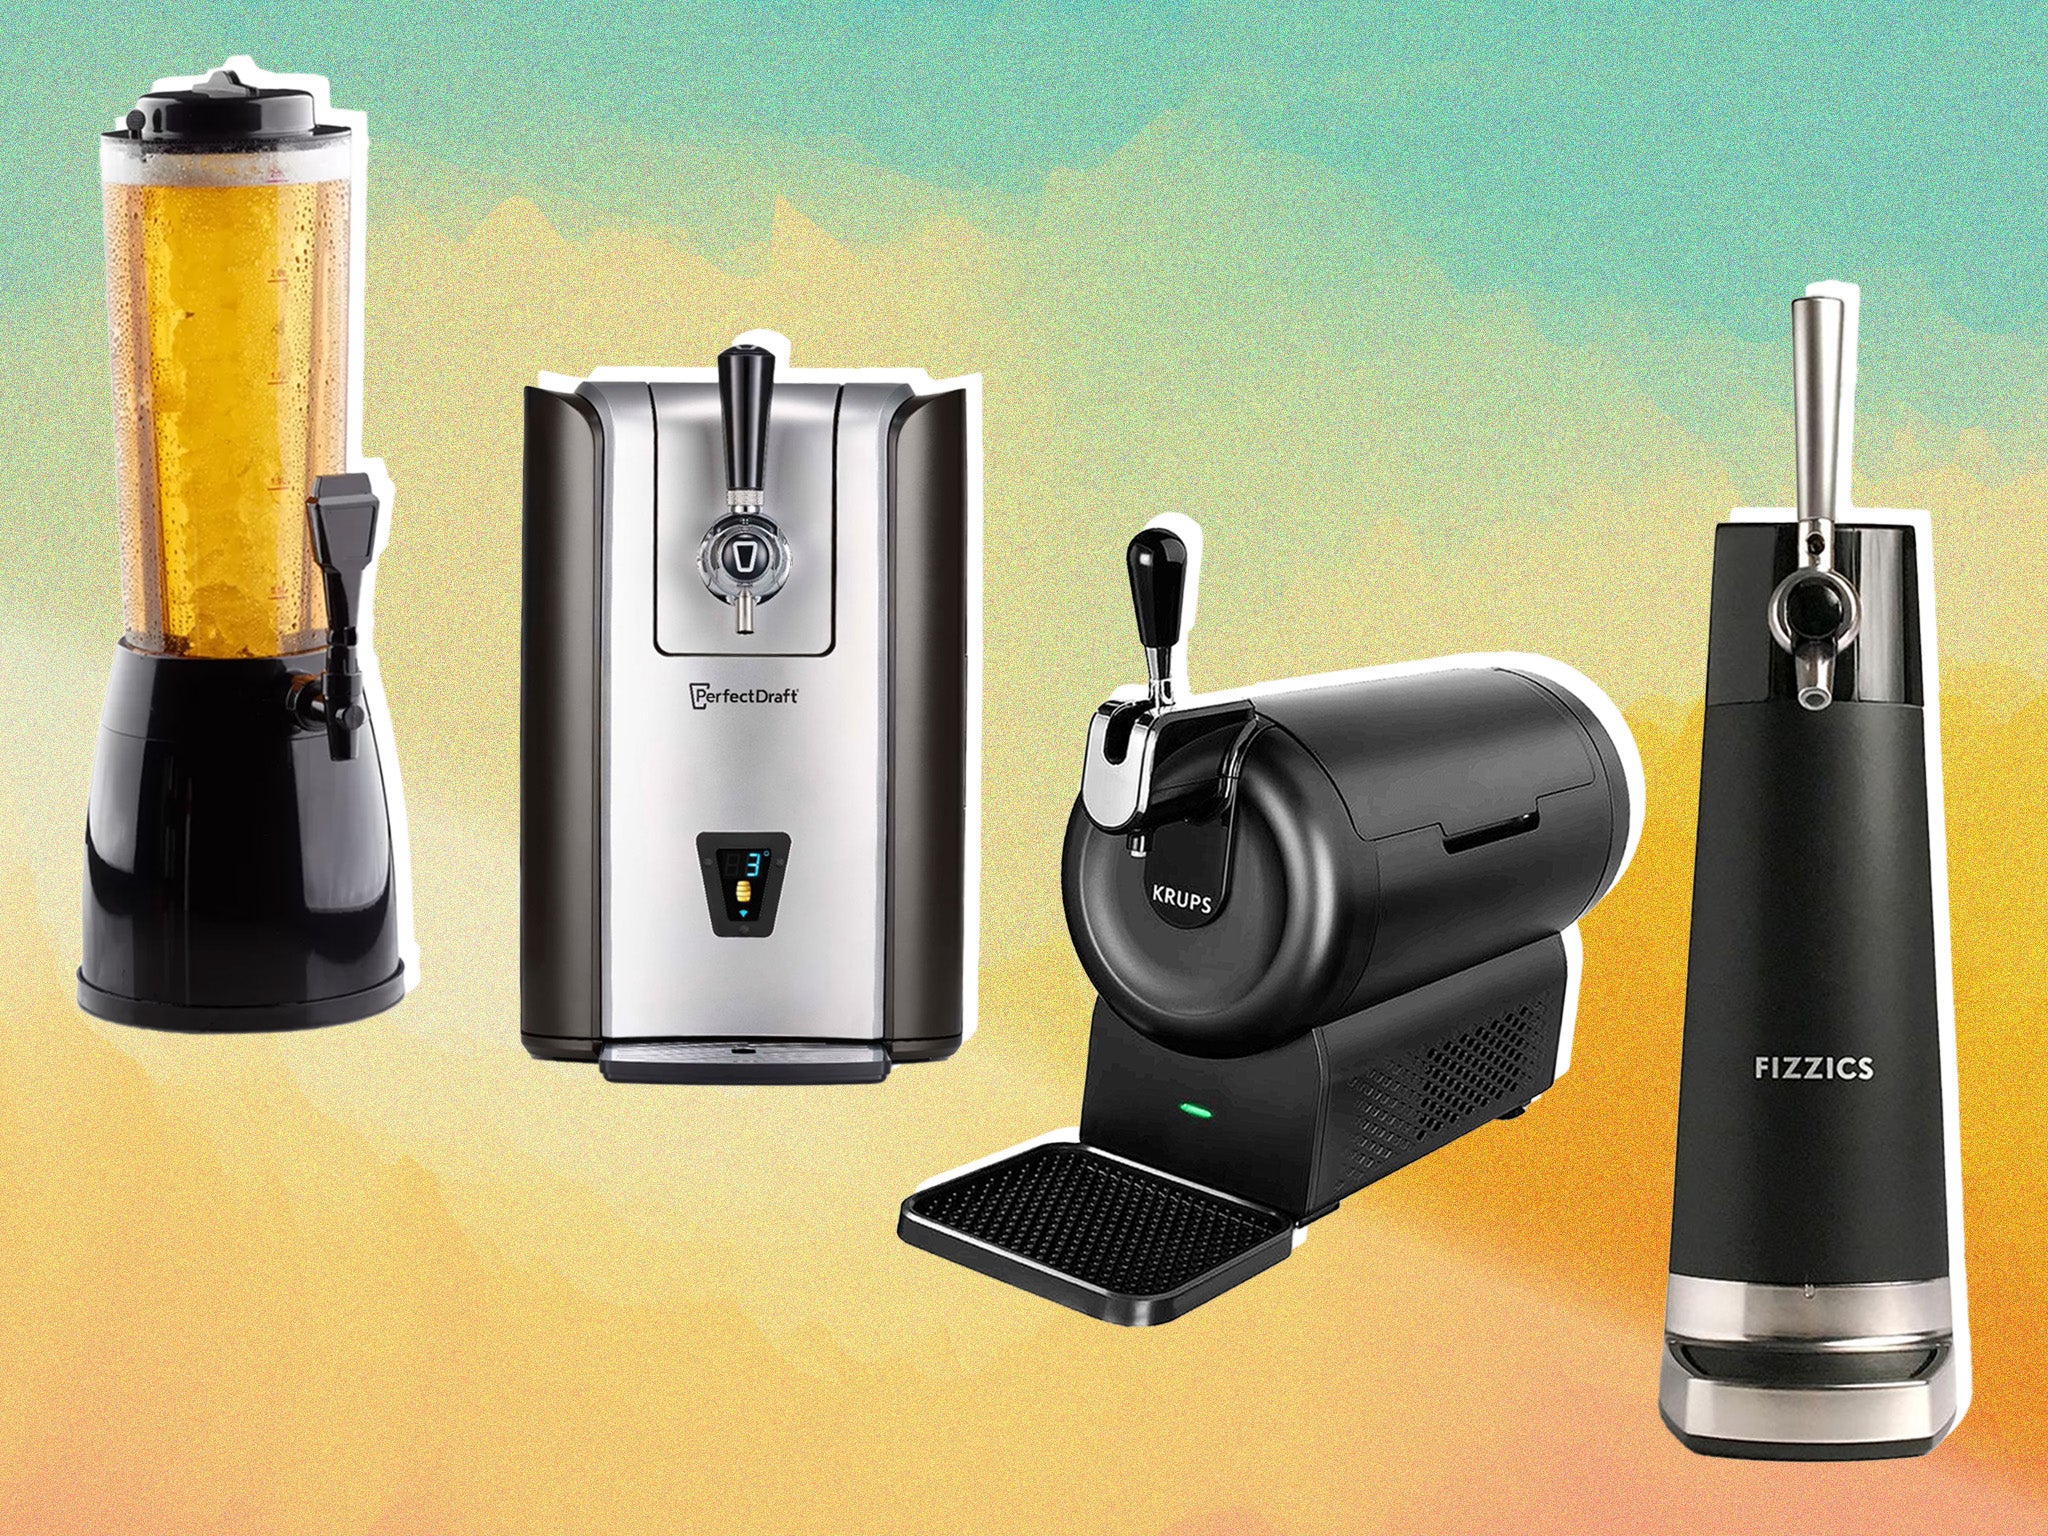 6 best home beer dispensers for pouring the perfect draught pint